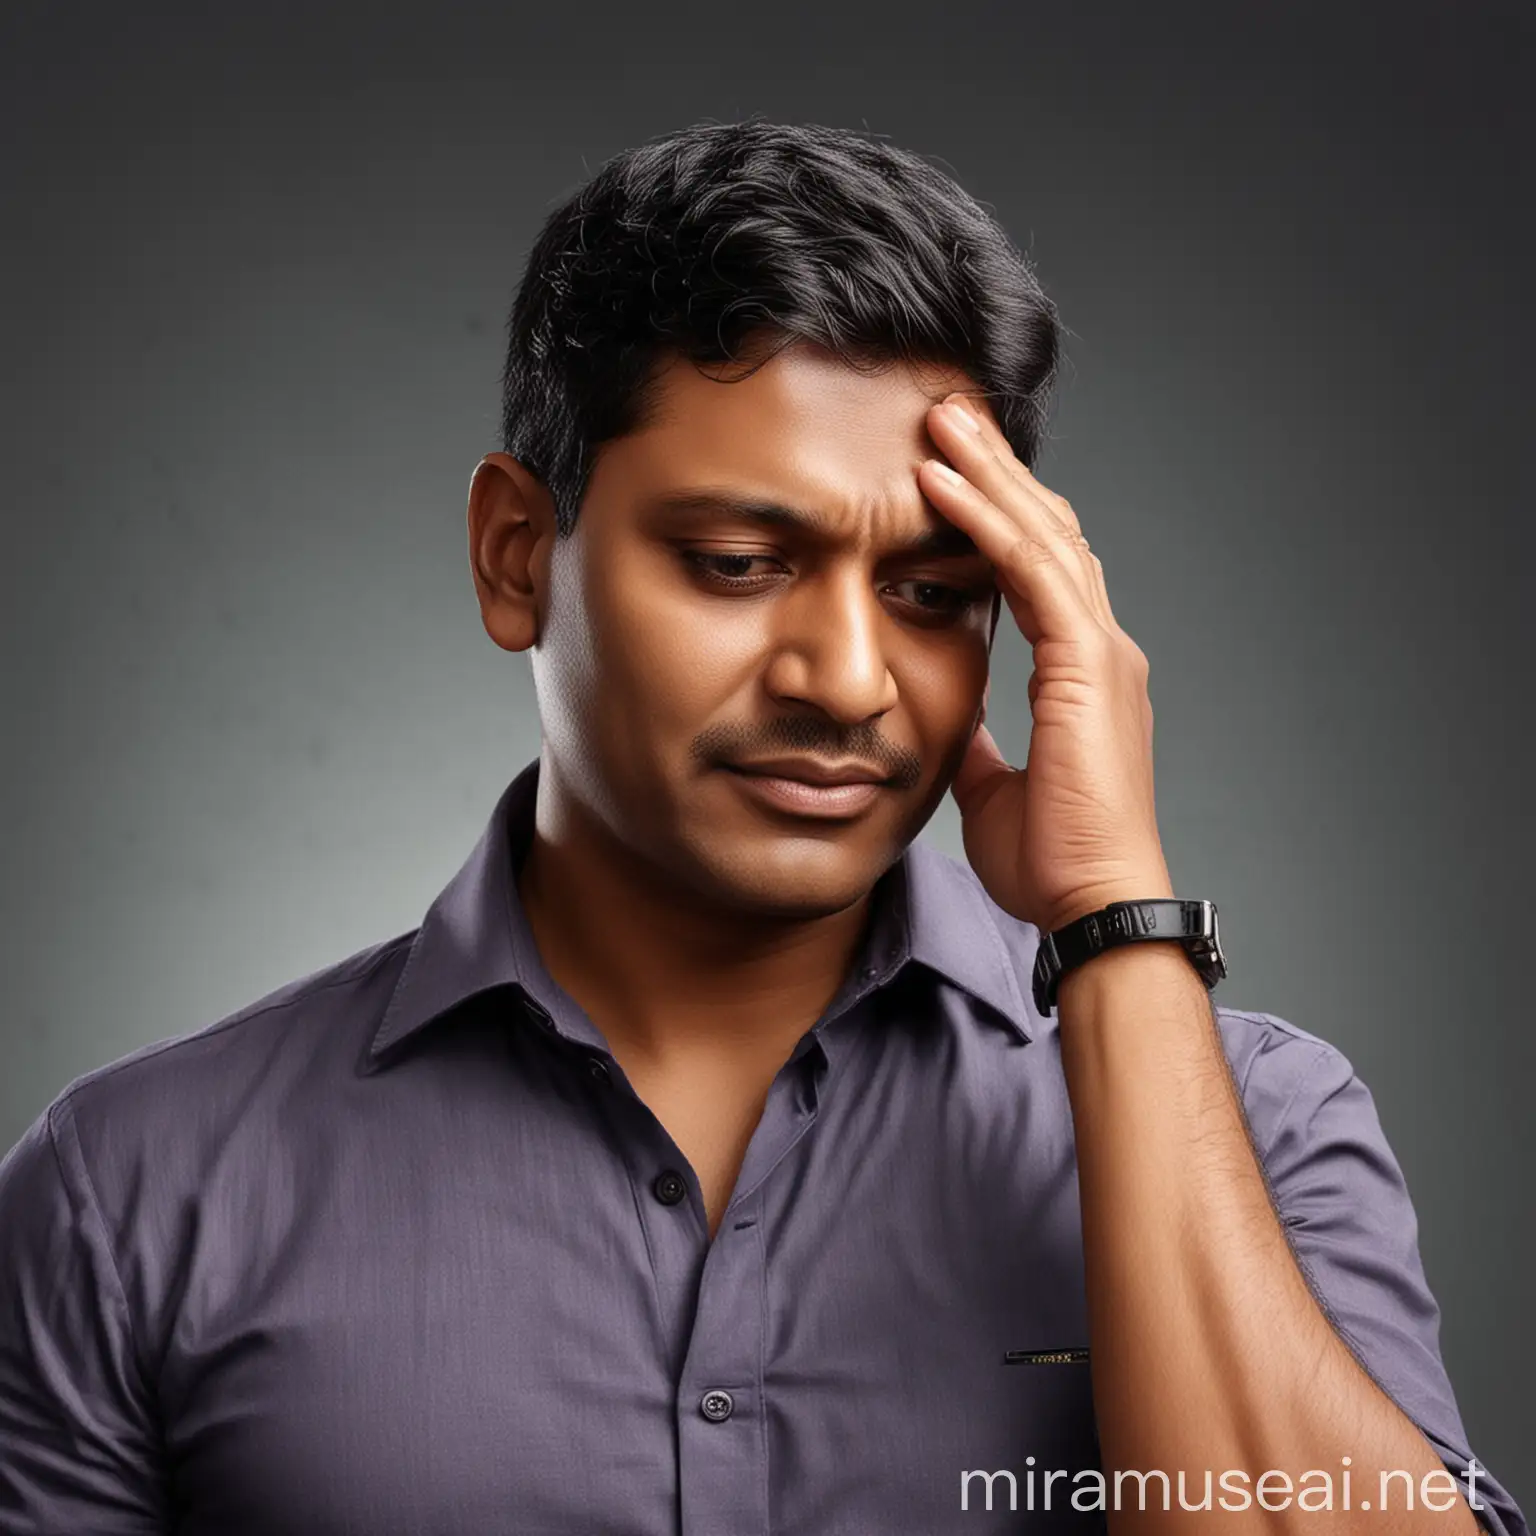 byju's raveendran owner of byju's is disappointed and hand on his forehead, realistic photo, hyper real, 